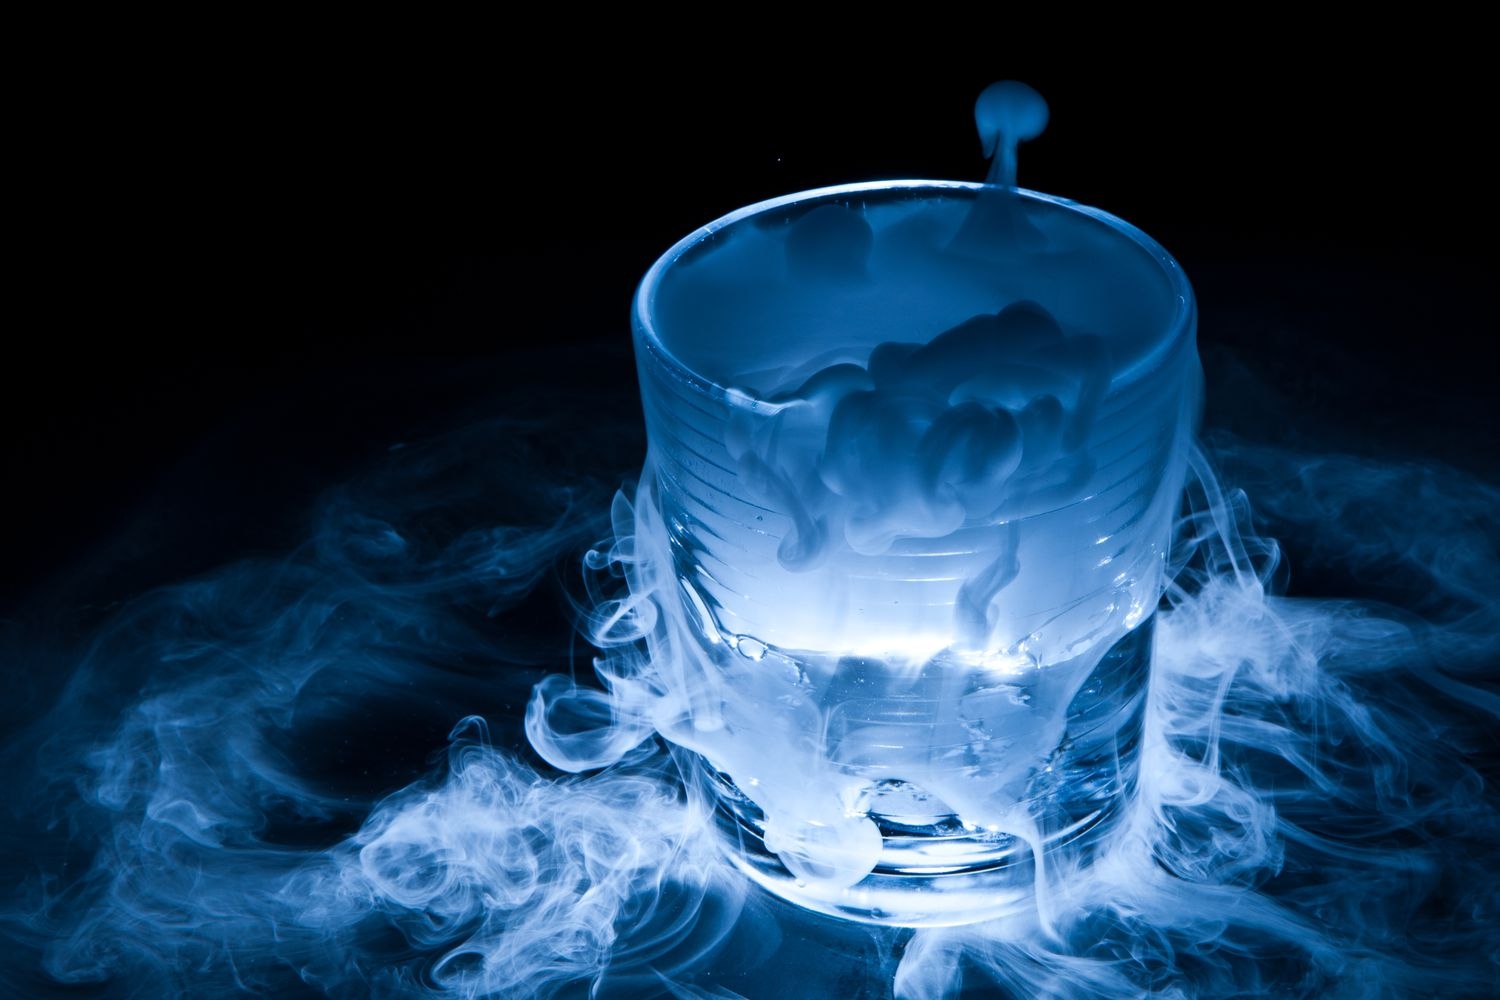 Cool Chemistry: 9 Unique Experiments Using Dry Ice